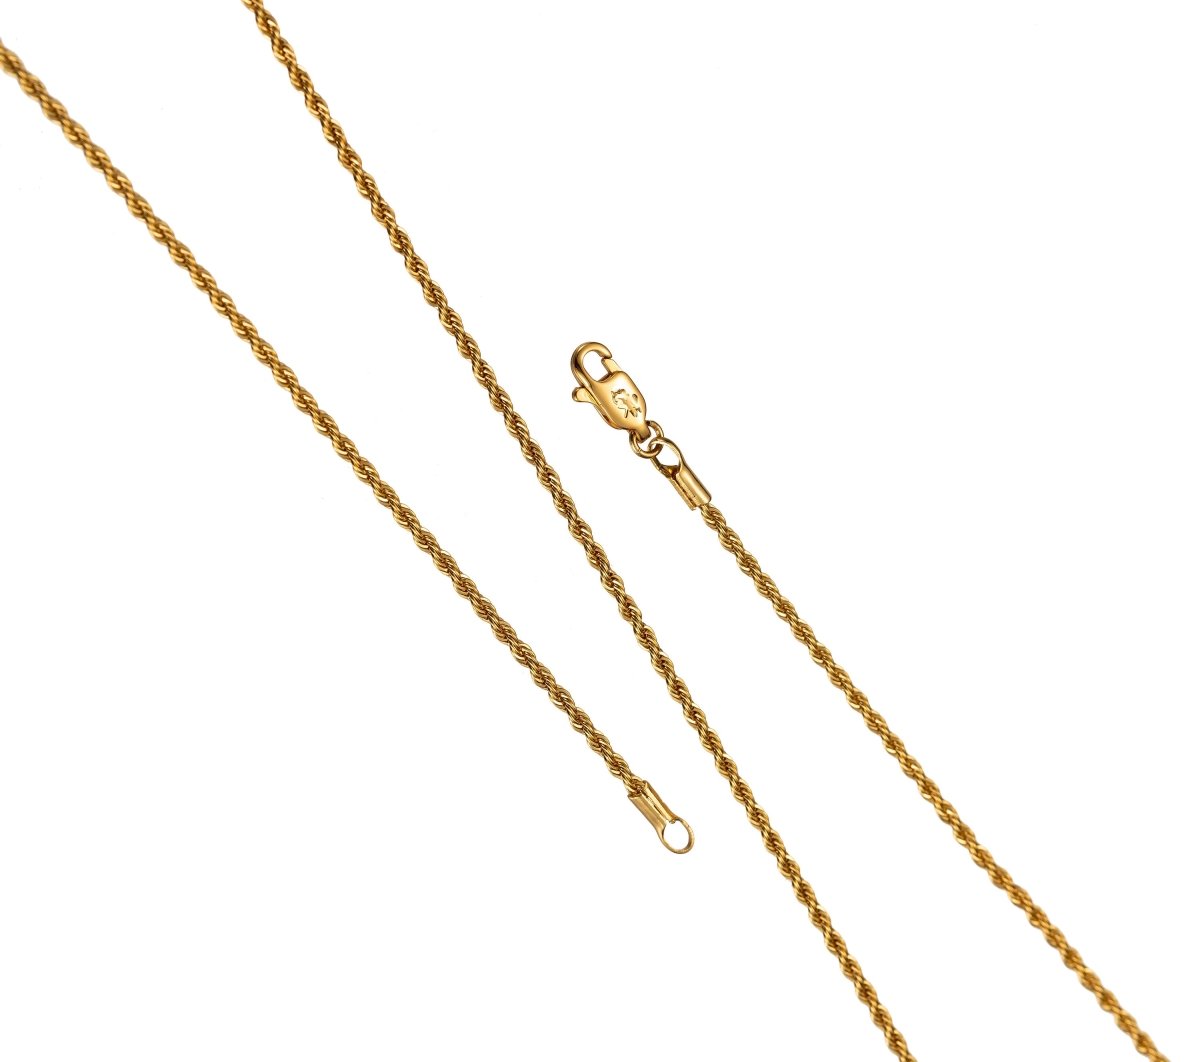 24K Gold Plated 2mm Rope Chain Necklace 23.5 Inch Gold Chain Ready to wear Chain w/ Lobster Clasps | CN-405 Clearance Pricing - DLUXCA